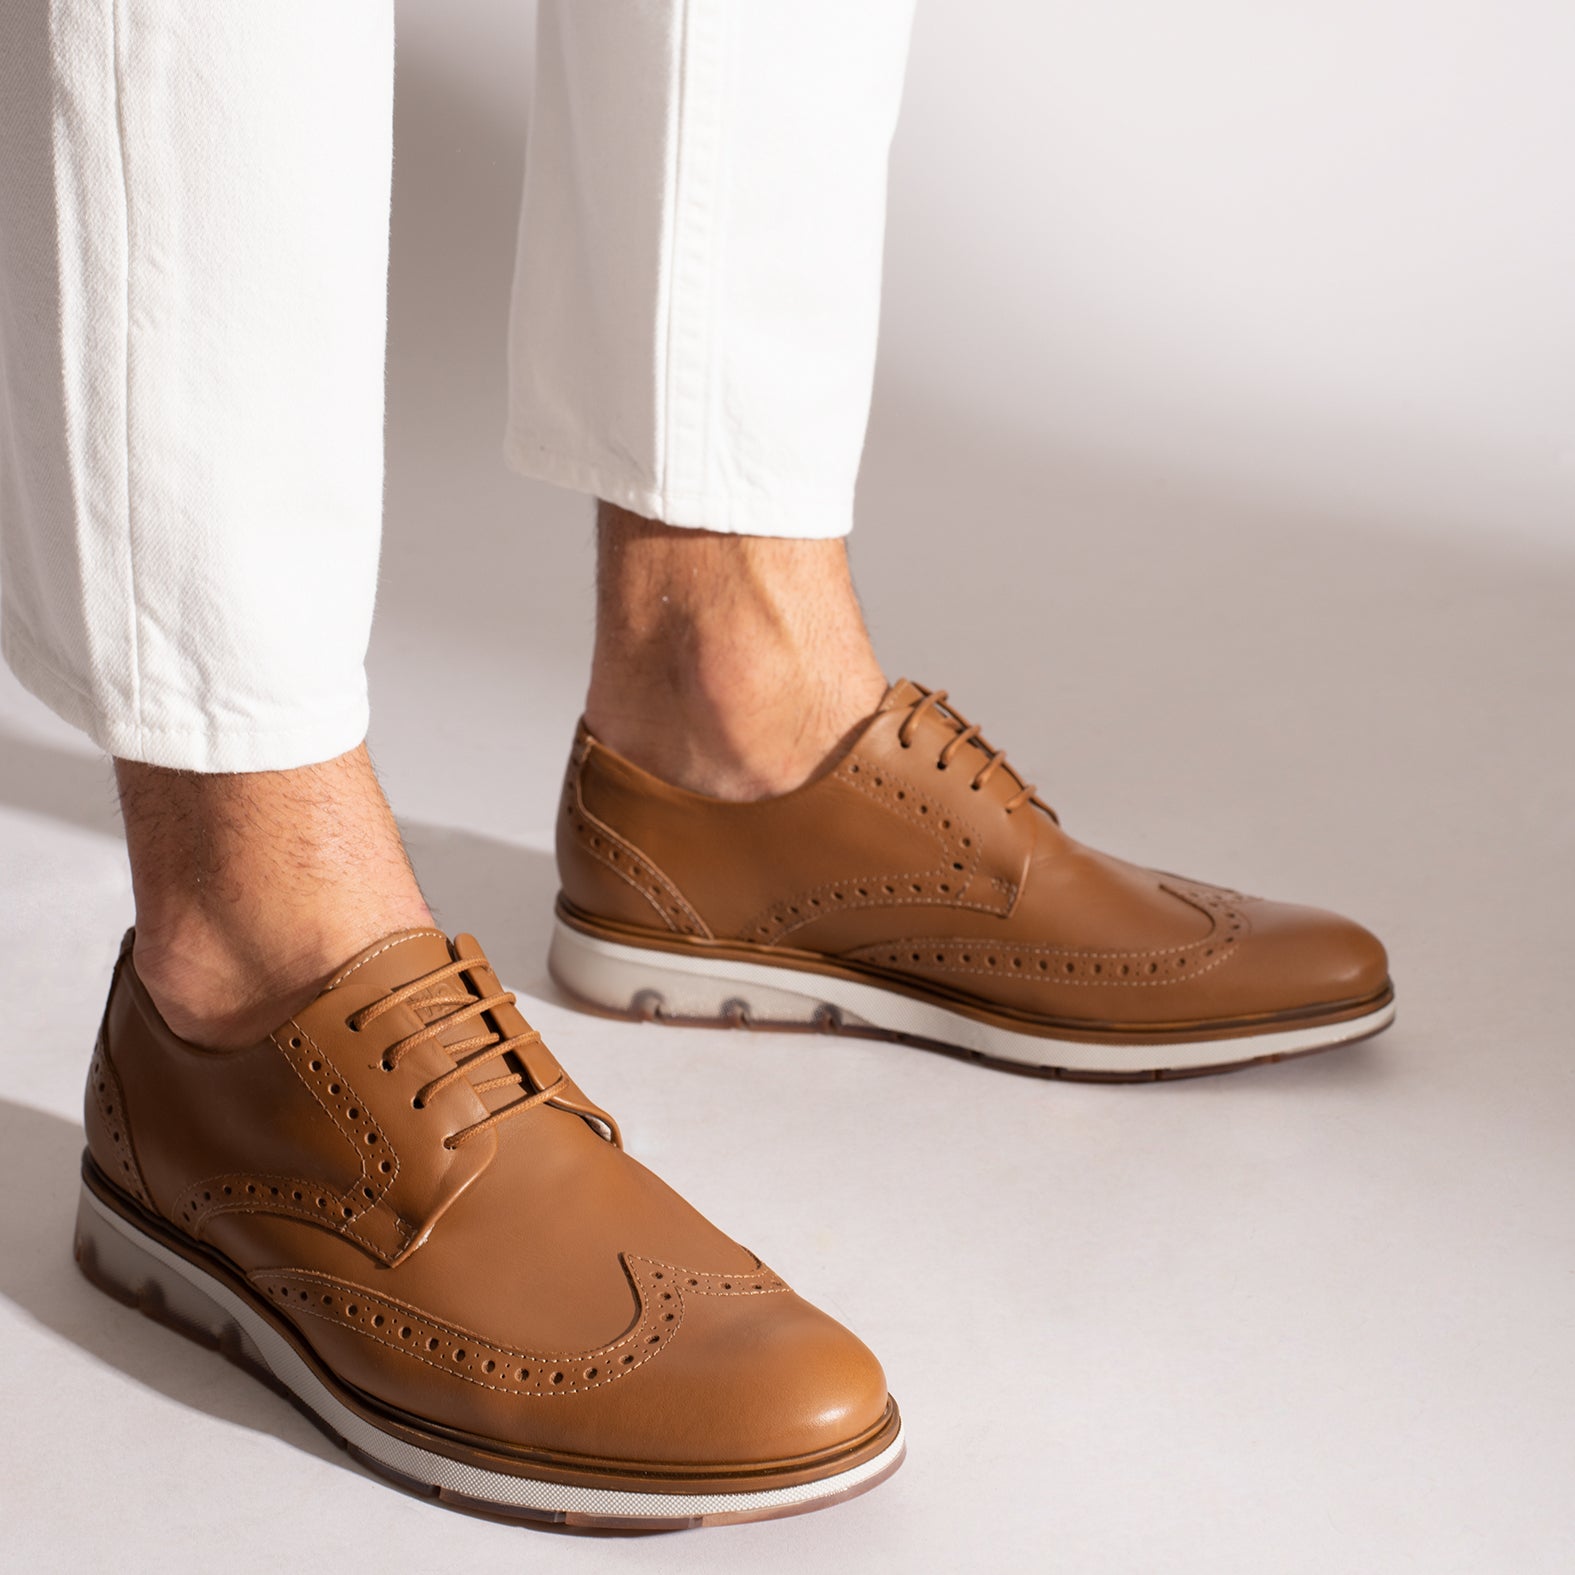 OXFORD – CAMEL classic english style brogue